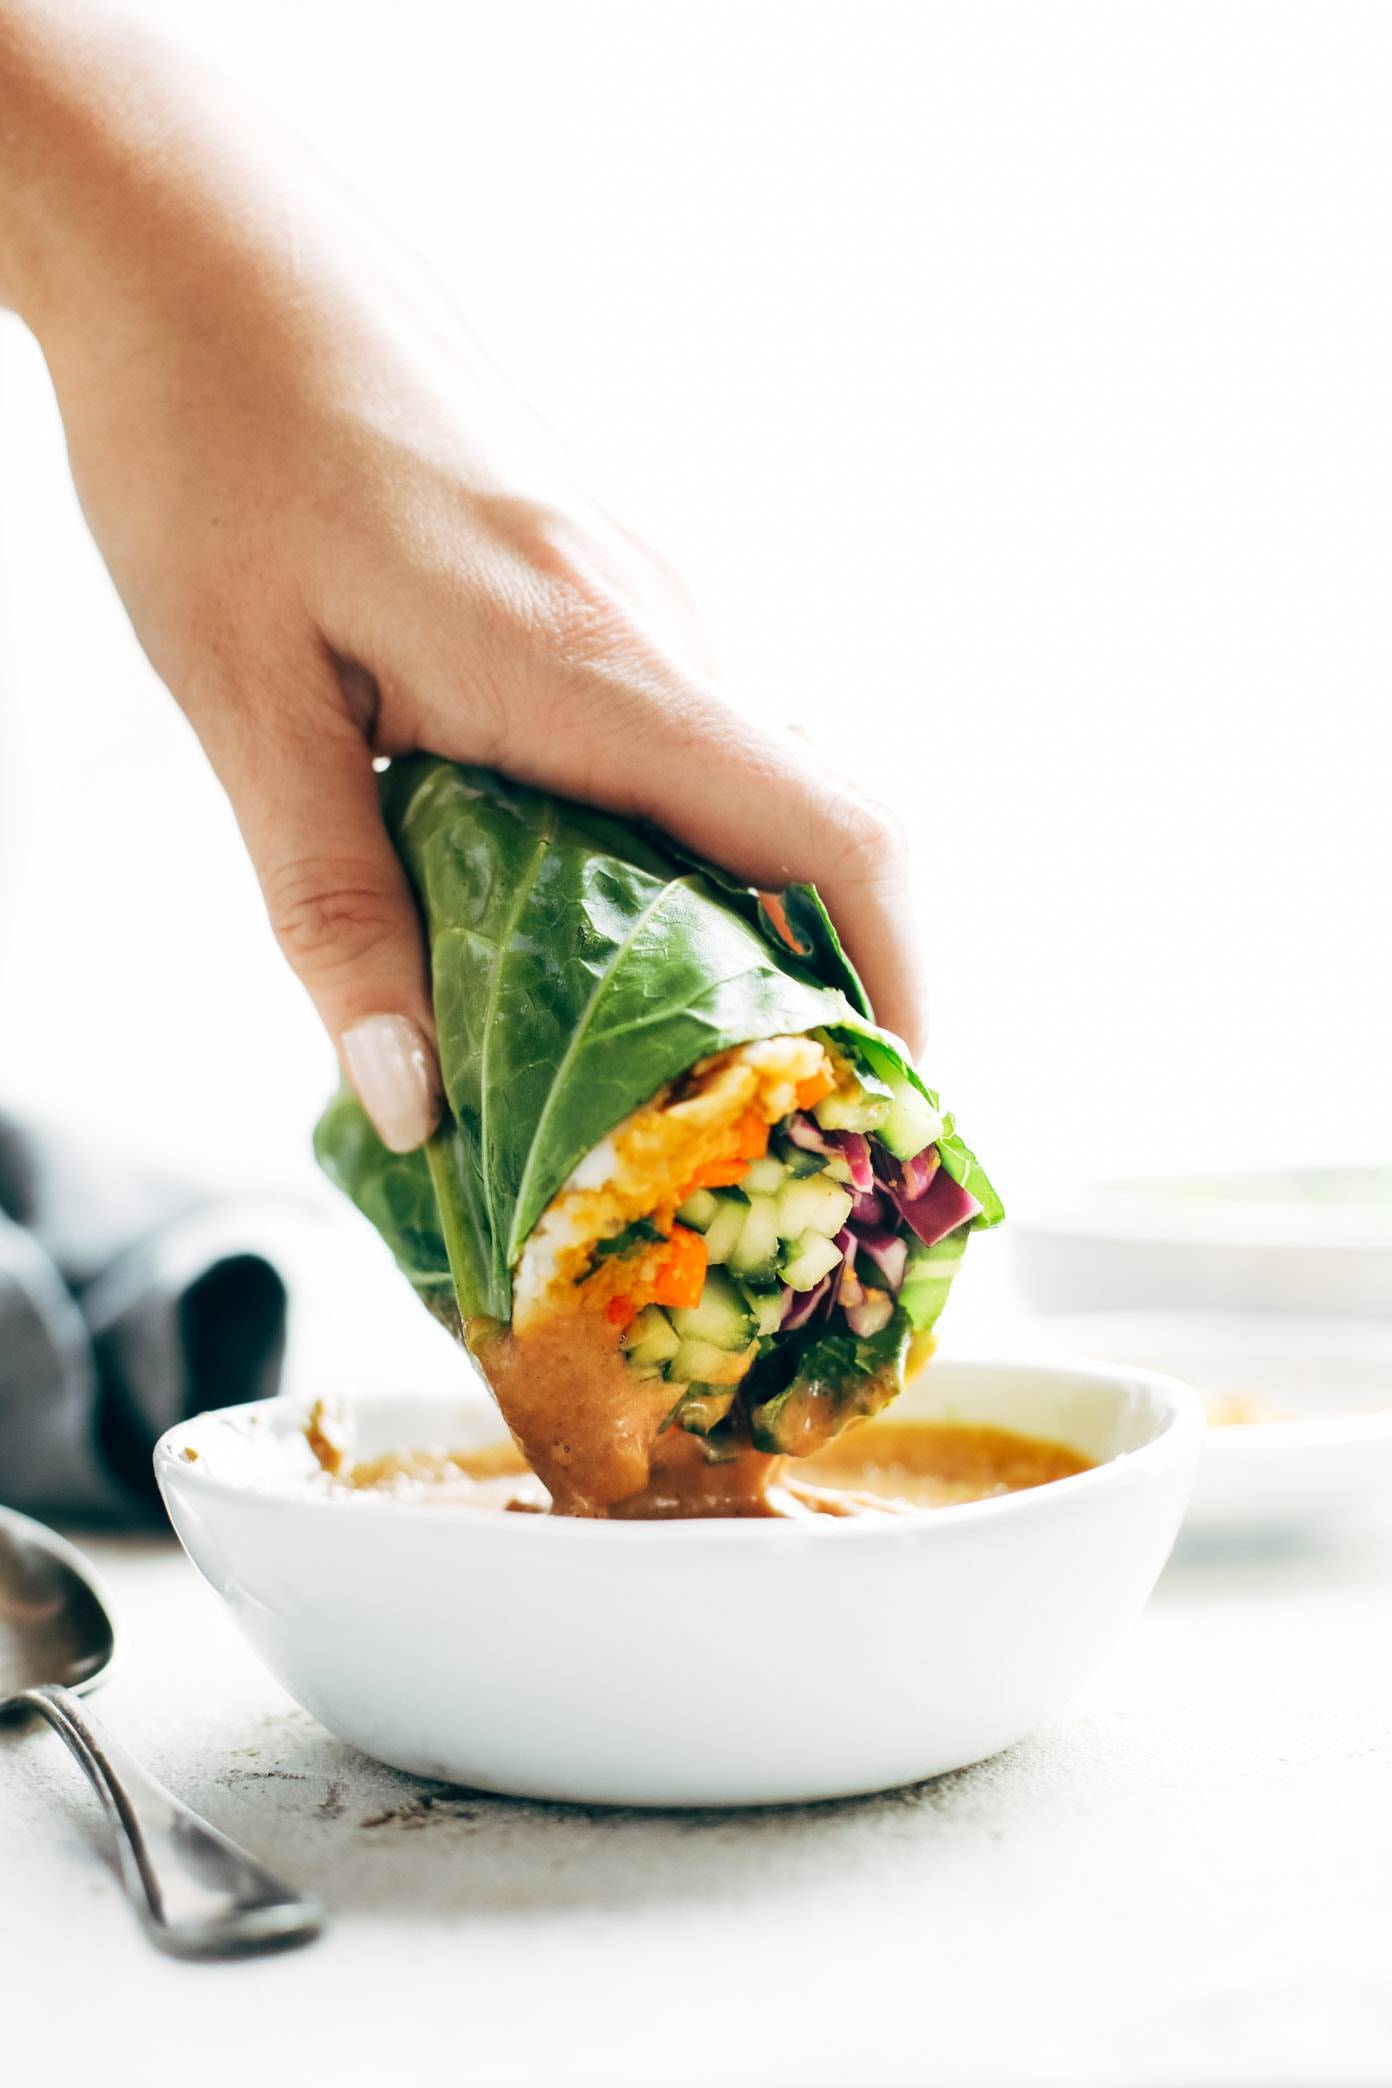 Detox Rainbow Roll-Ups - with curry hummus and veggies in a collard leaf, dunked in peanut sauce! most beautiful healthy desk lunch! | pinchofyum.com